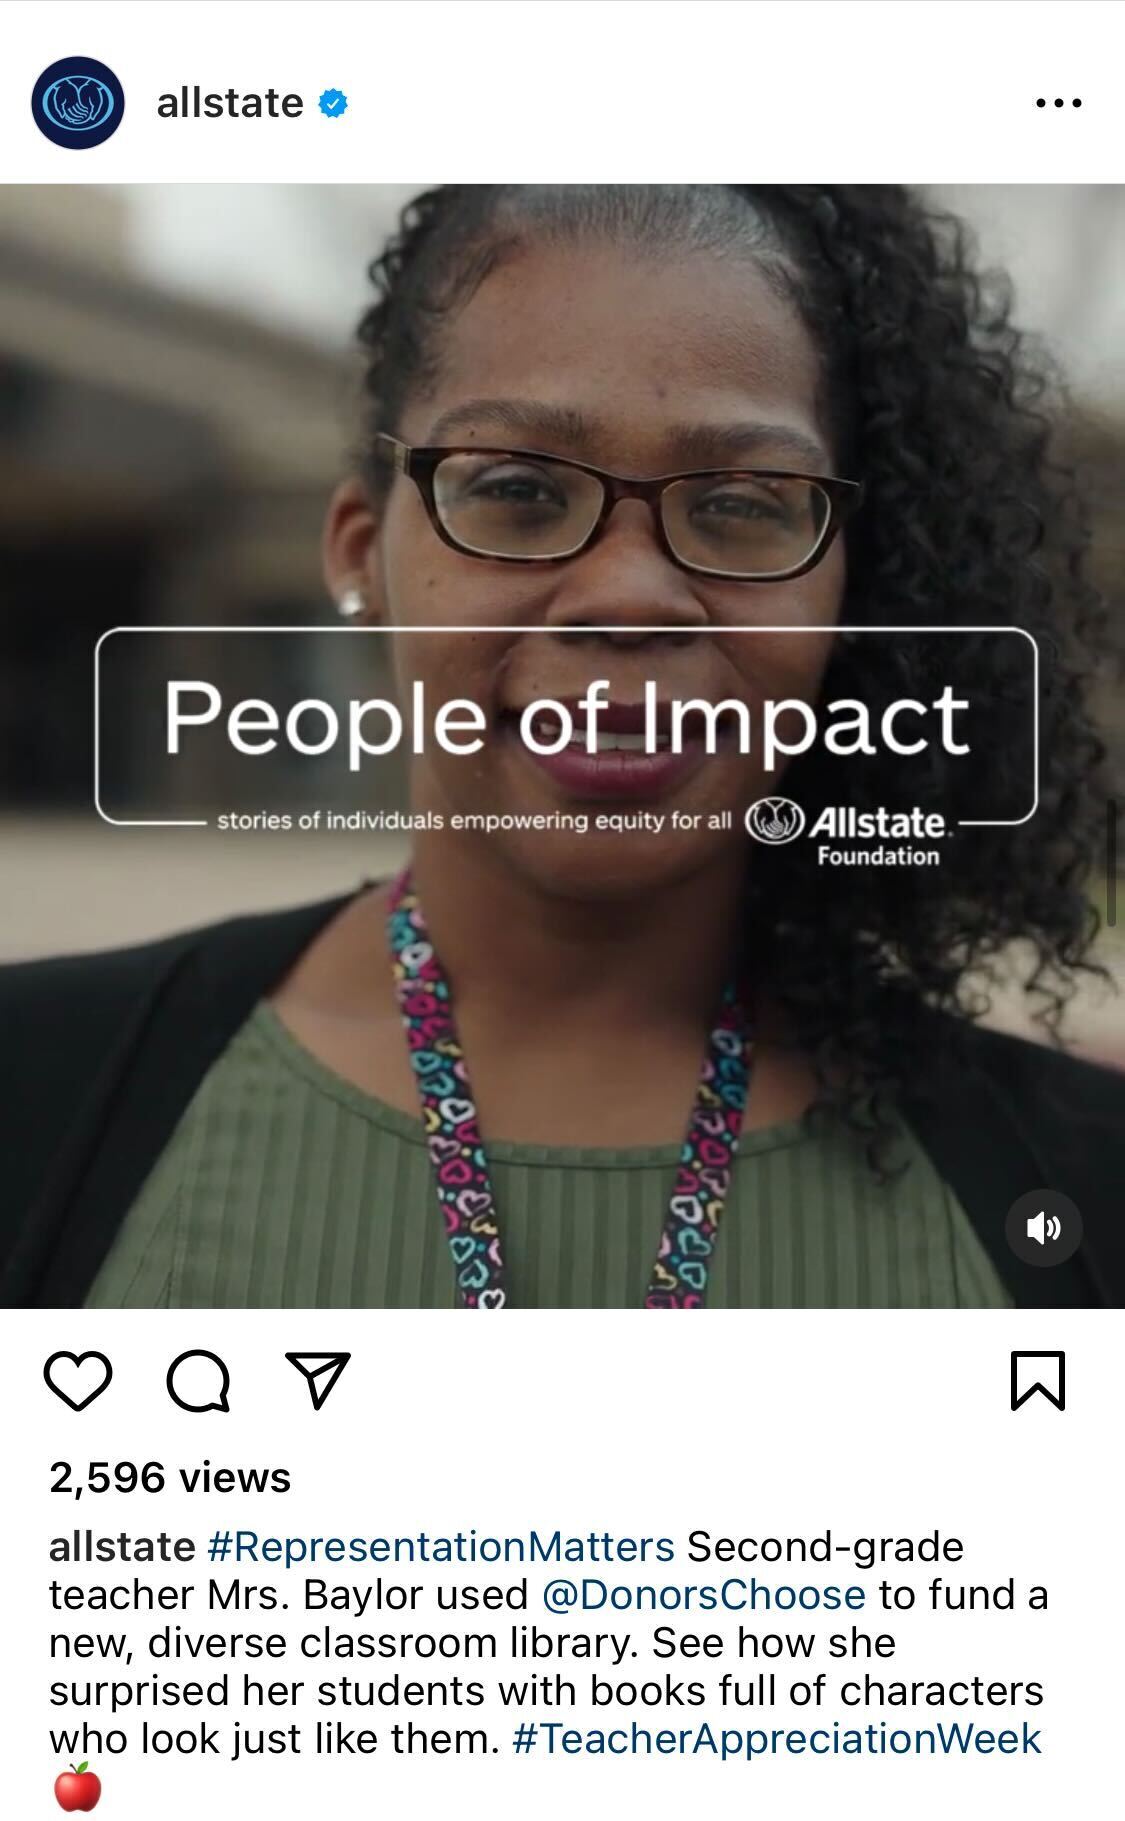 A screenshot of Allstate’s Instagram feed depicts an image of an educator with the words “People of Impact: stories of individuals empowering equity for all, Allstate Foundation” written over the educator’s image in white print. The image description says, “#Representationmatters Second-grade teacher Mrs. Baylor used @DonorsChoose to fund a new, diverse classroom library. See how she surprised her students with books full of characters who look just like them. #TeacherAppreciationWeek.” 